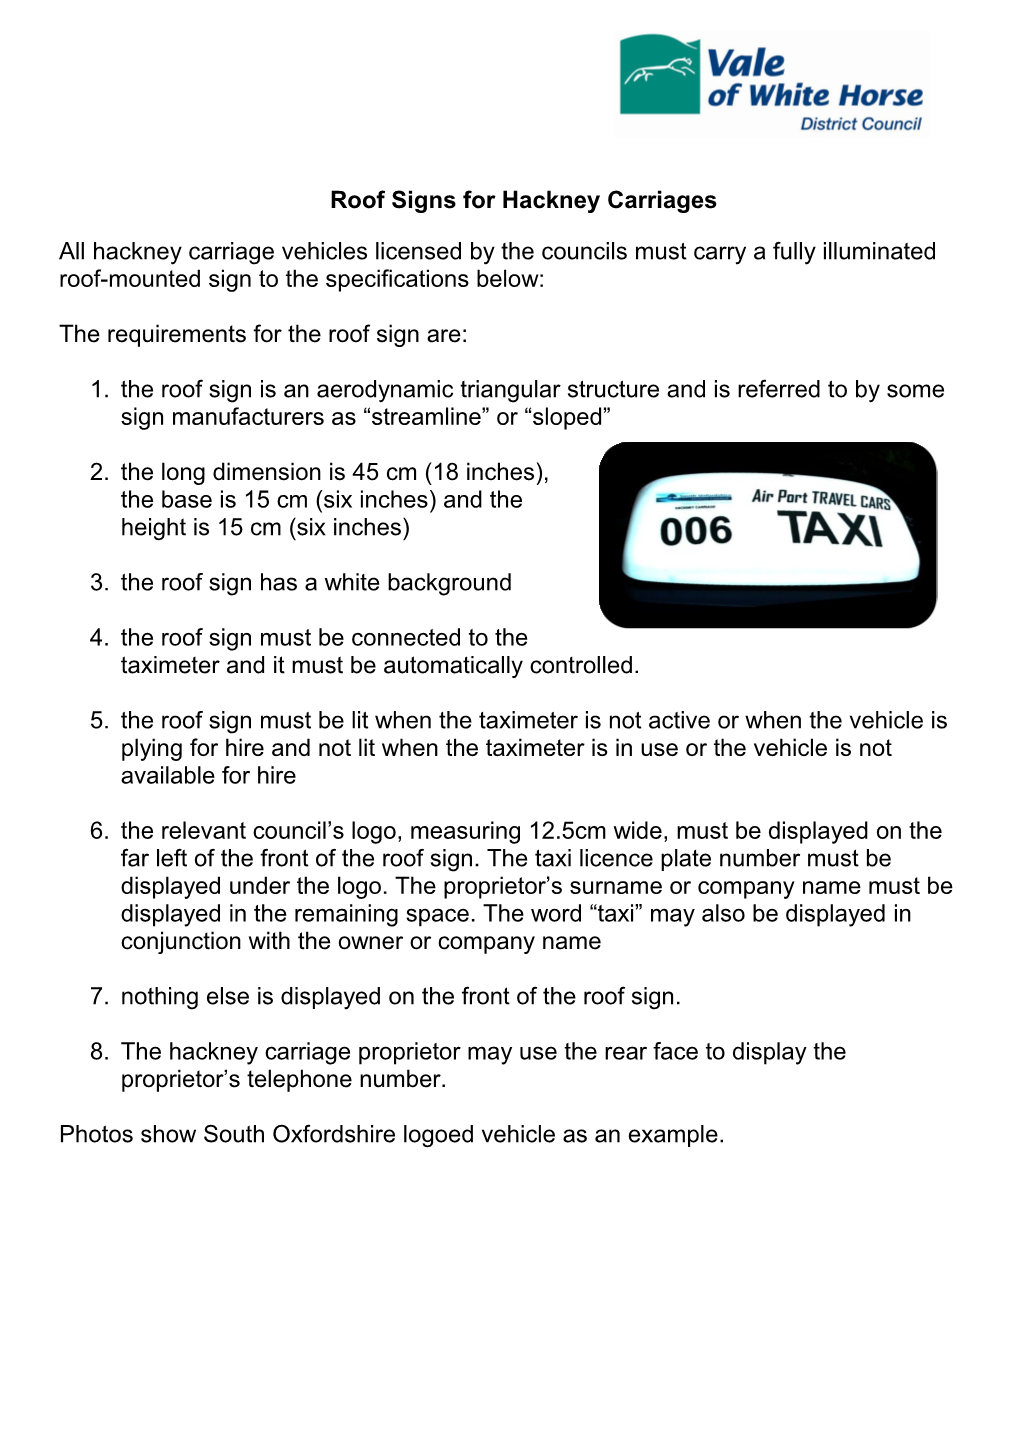 A Hackney Carriage Licensed by the Council Must Carry a Fully Illuminated Roof-Mounted Sign